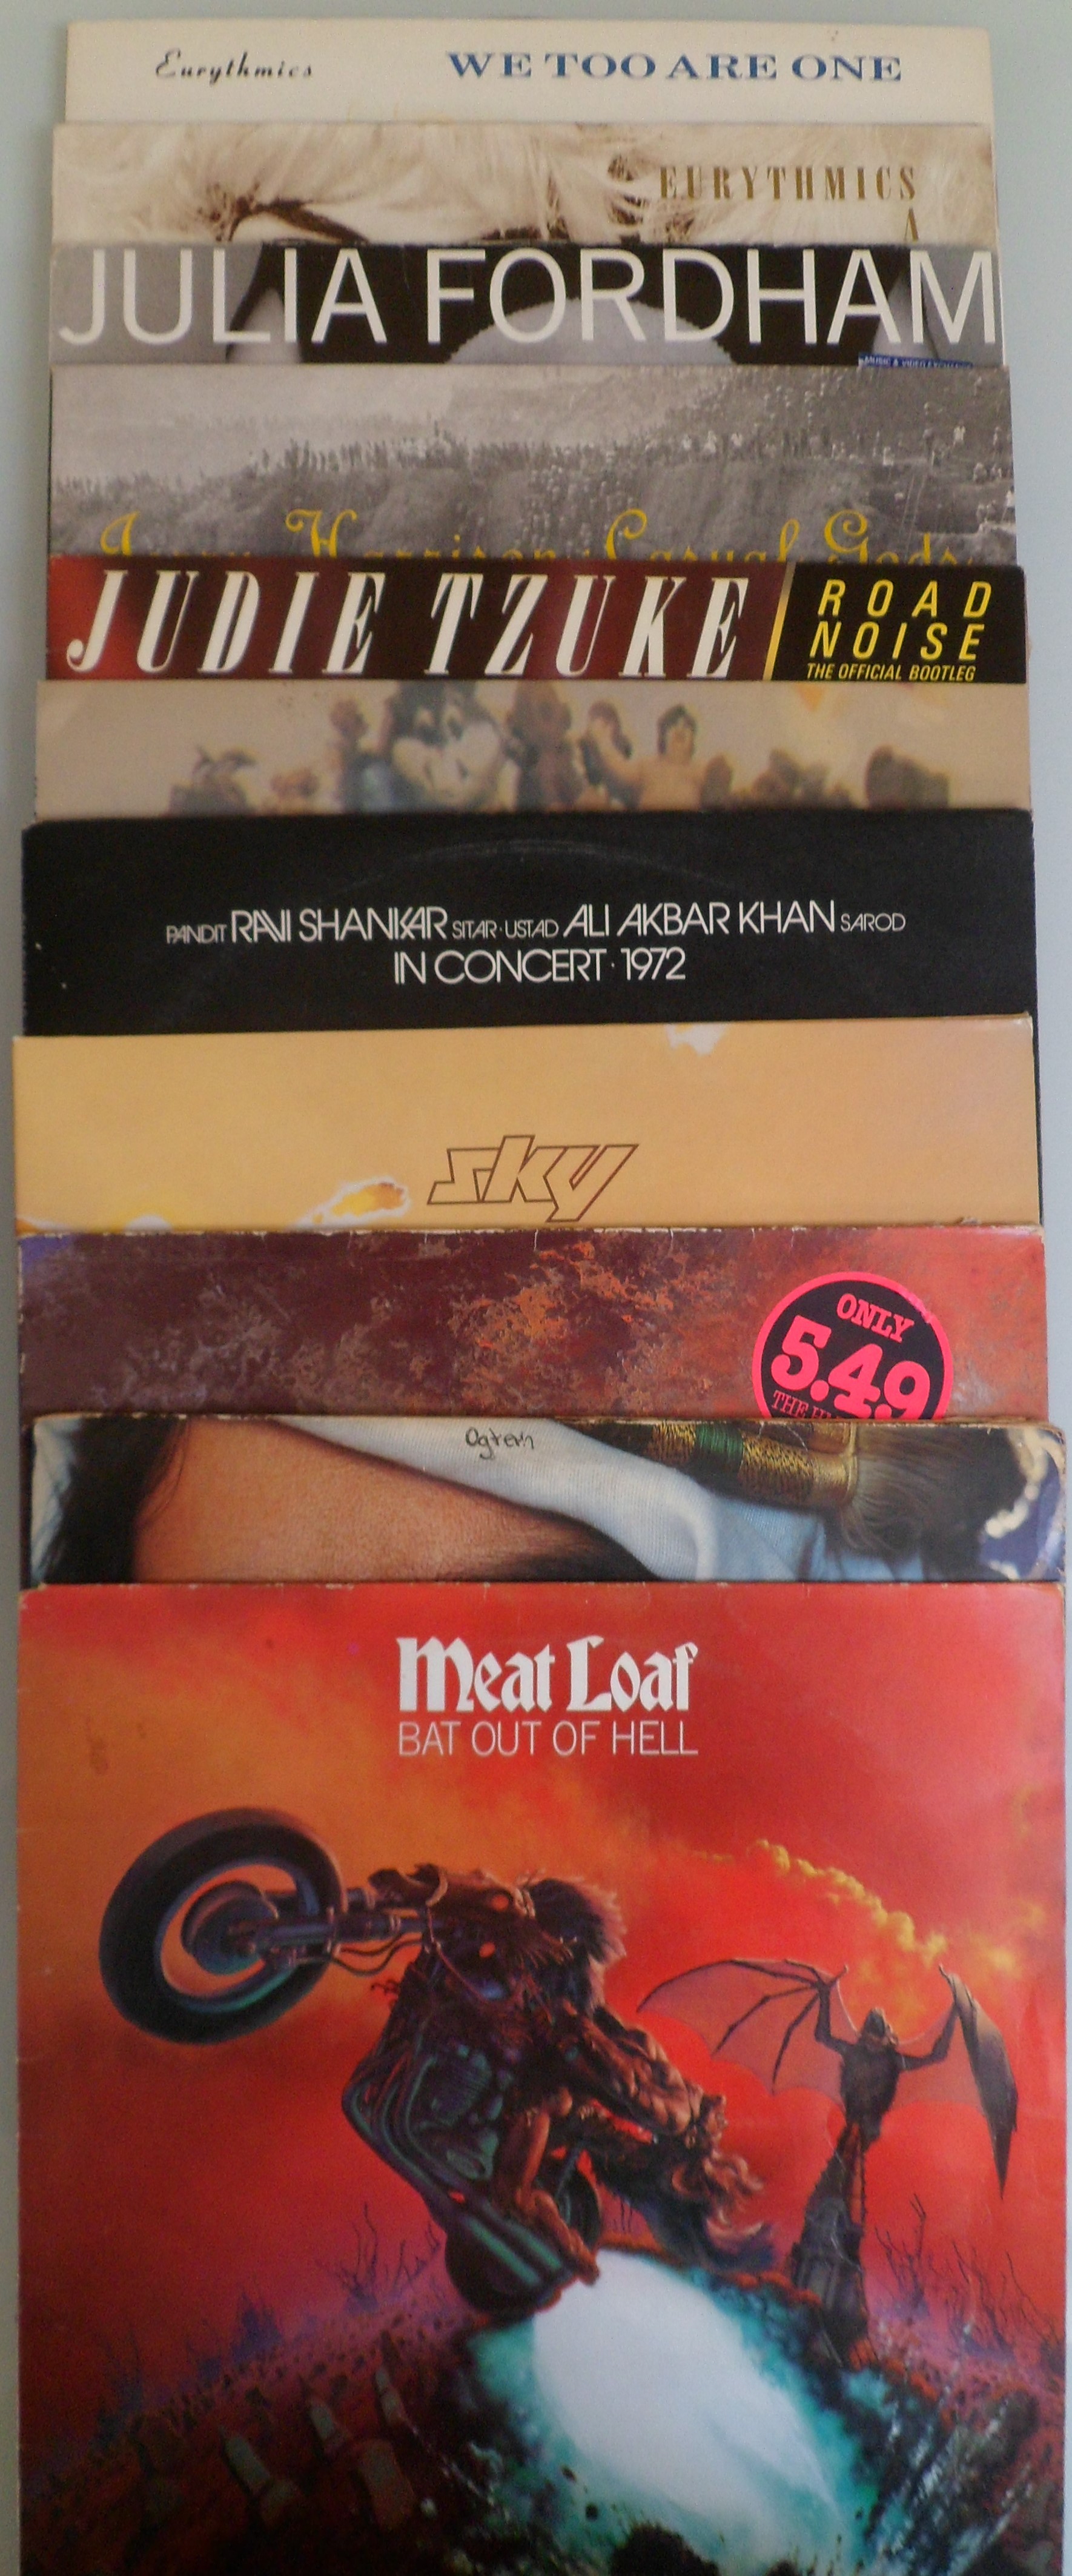 A Collection of 11 x Vinyl Lps. Meatloaf Bat Out of Hell - Sheik Yerbonti - Japan - Ravi Shankar.